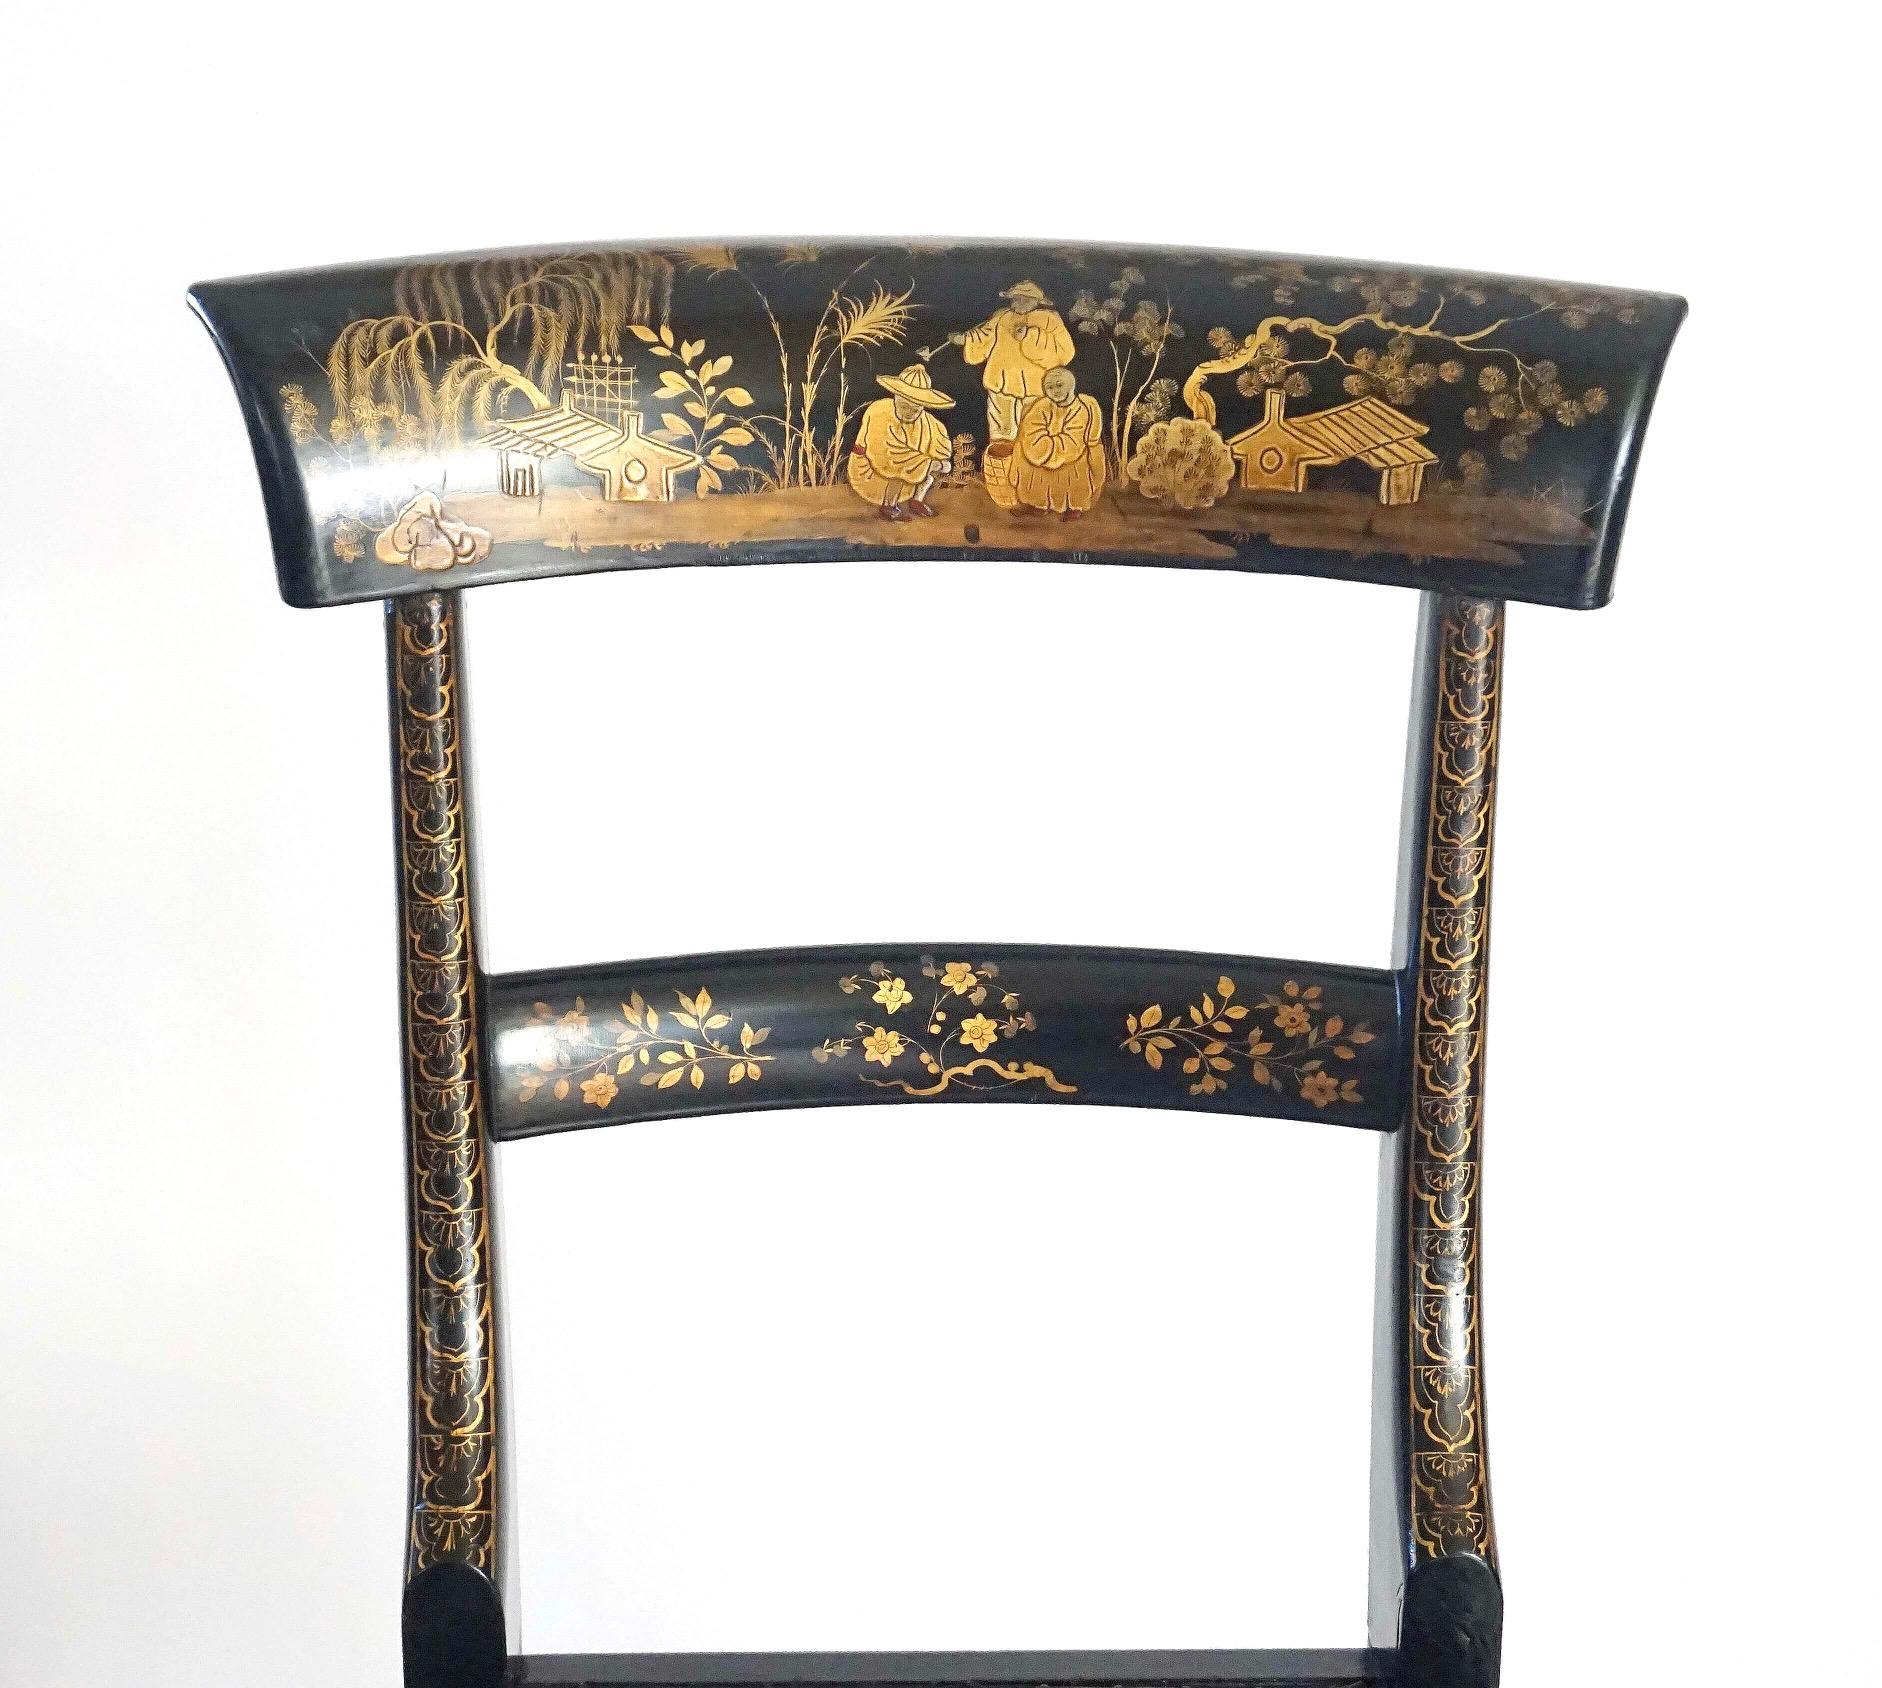 19th Century English Chinoiserie Chairs, Ex-Garvan Collection Yale University, circa 1835 For Sale